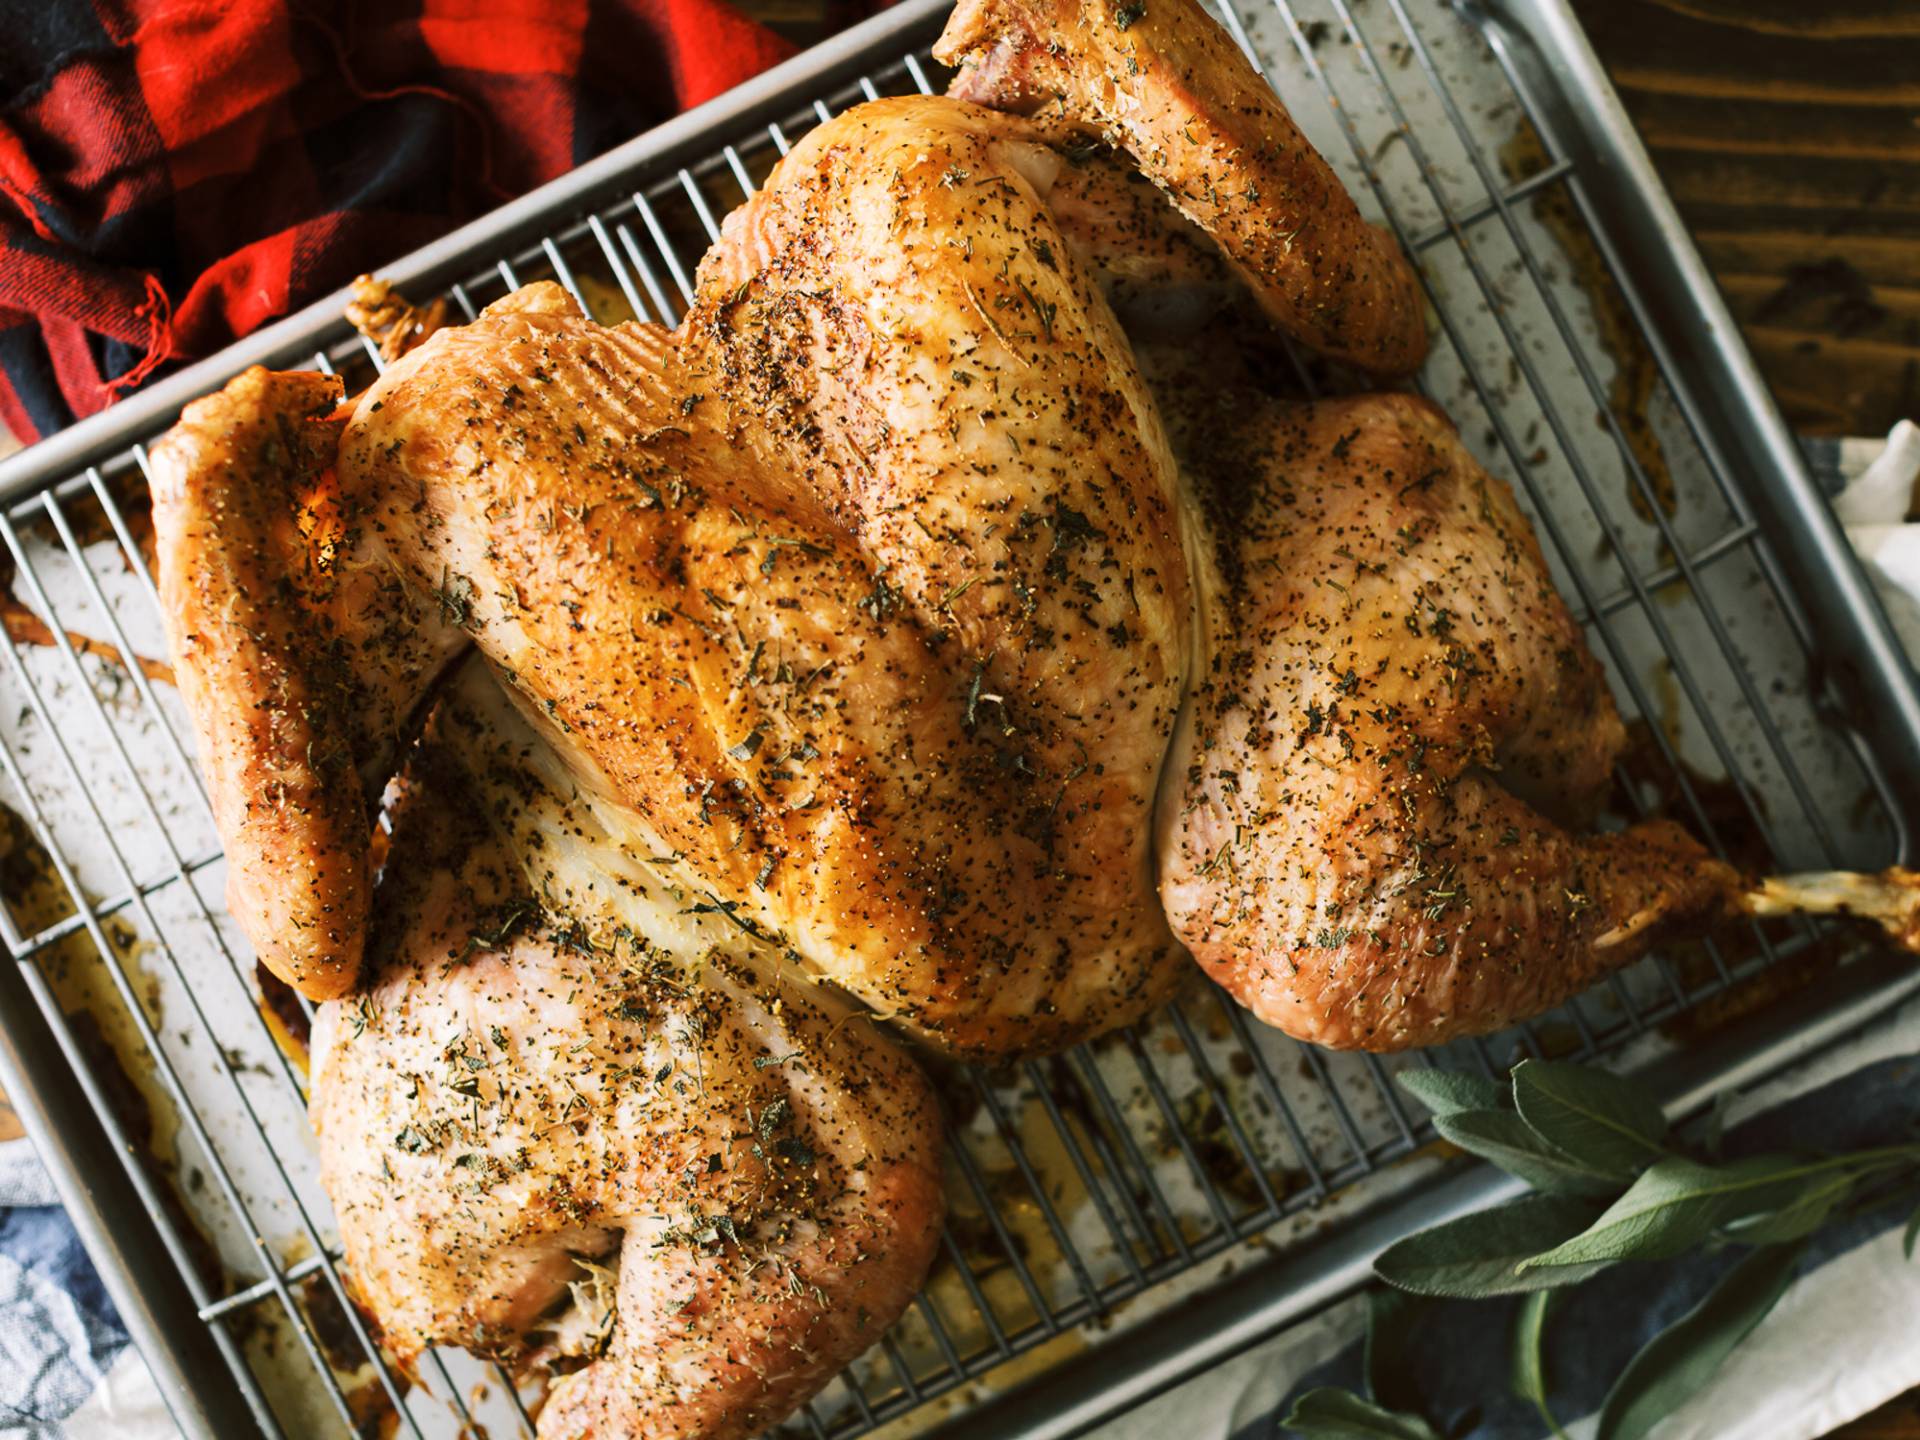 To get properly cooked dark meat without sacrificing a tender breast, some cooks choose to spatchcock their turkey before they roast it. Spatchcocking is a technique in which you remove the backbone so the bird lays flat.